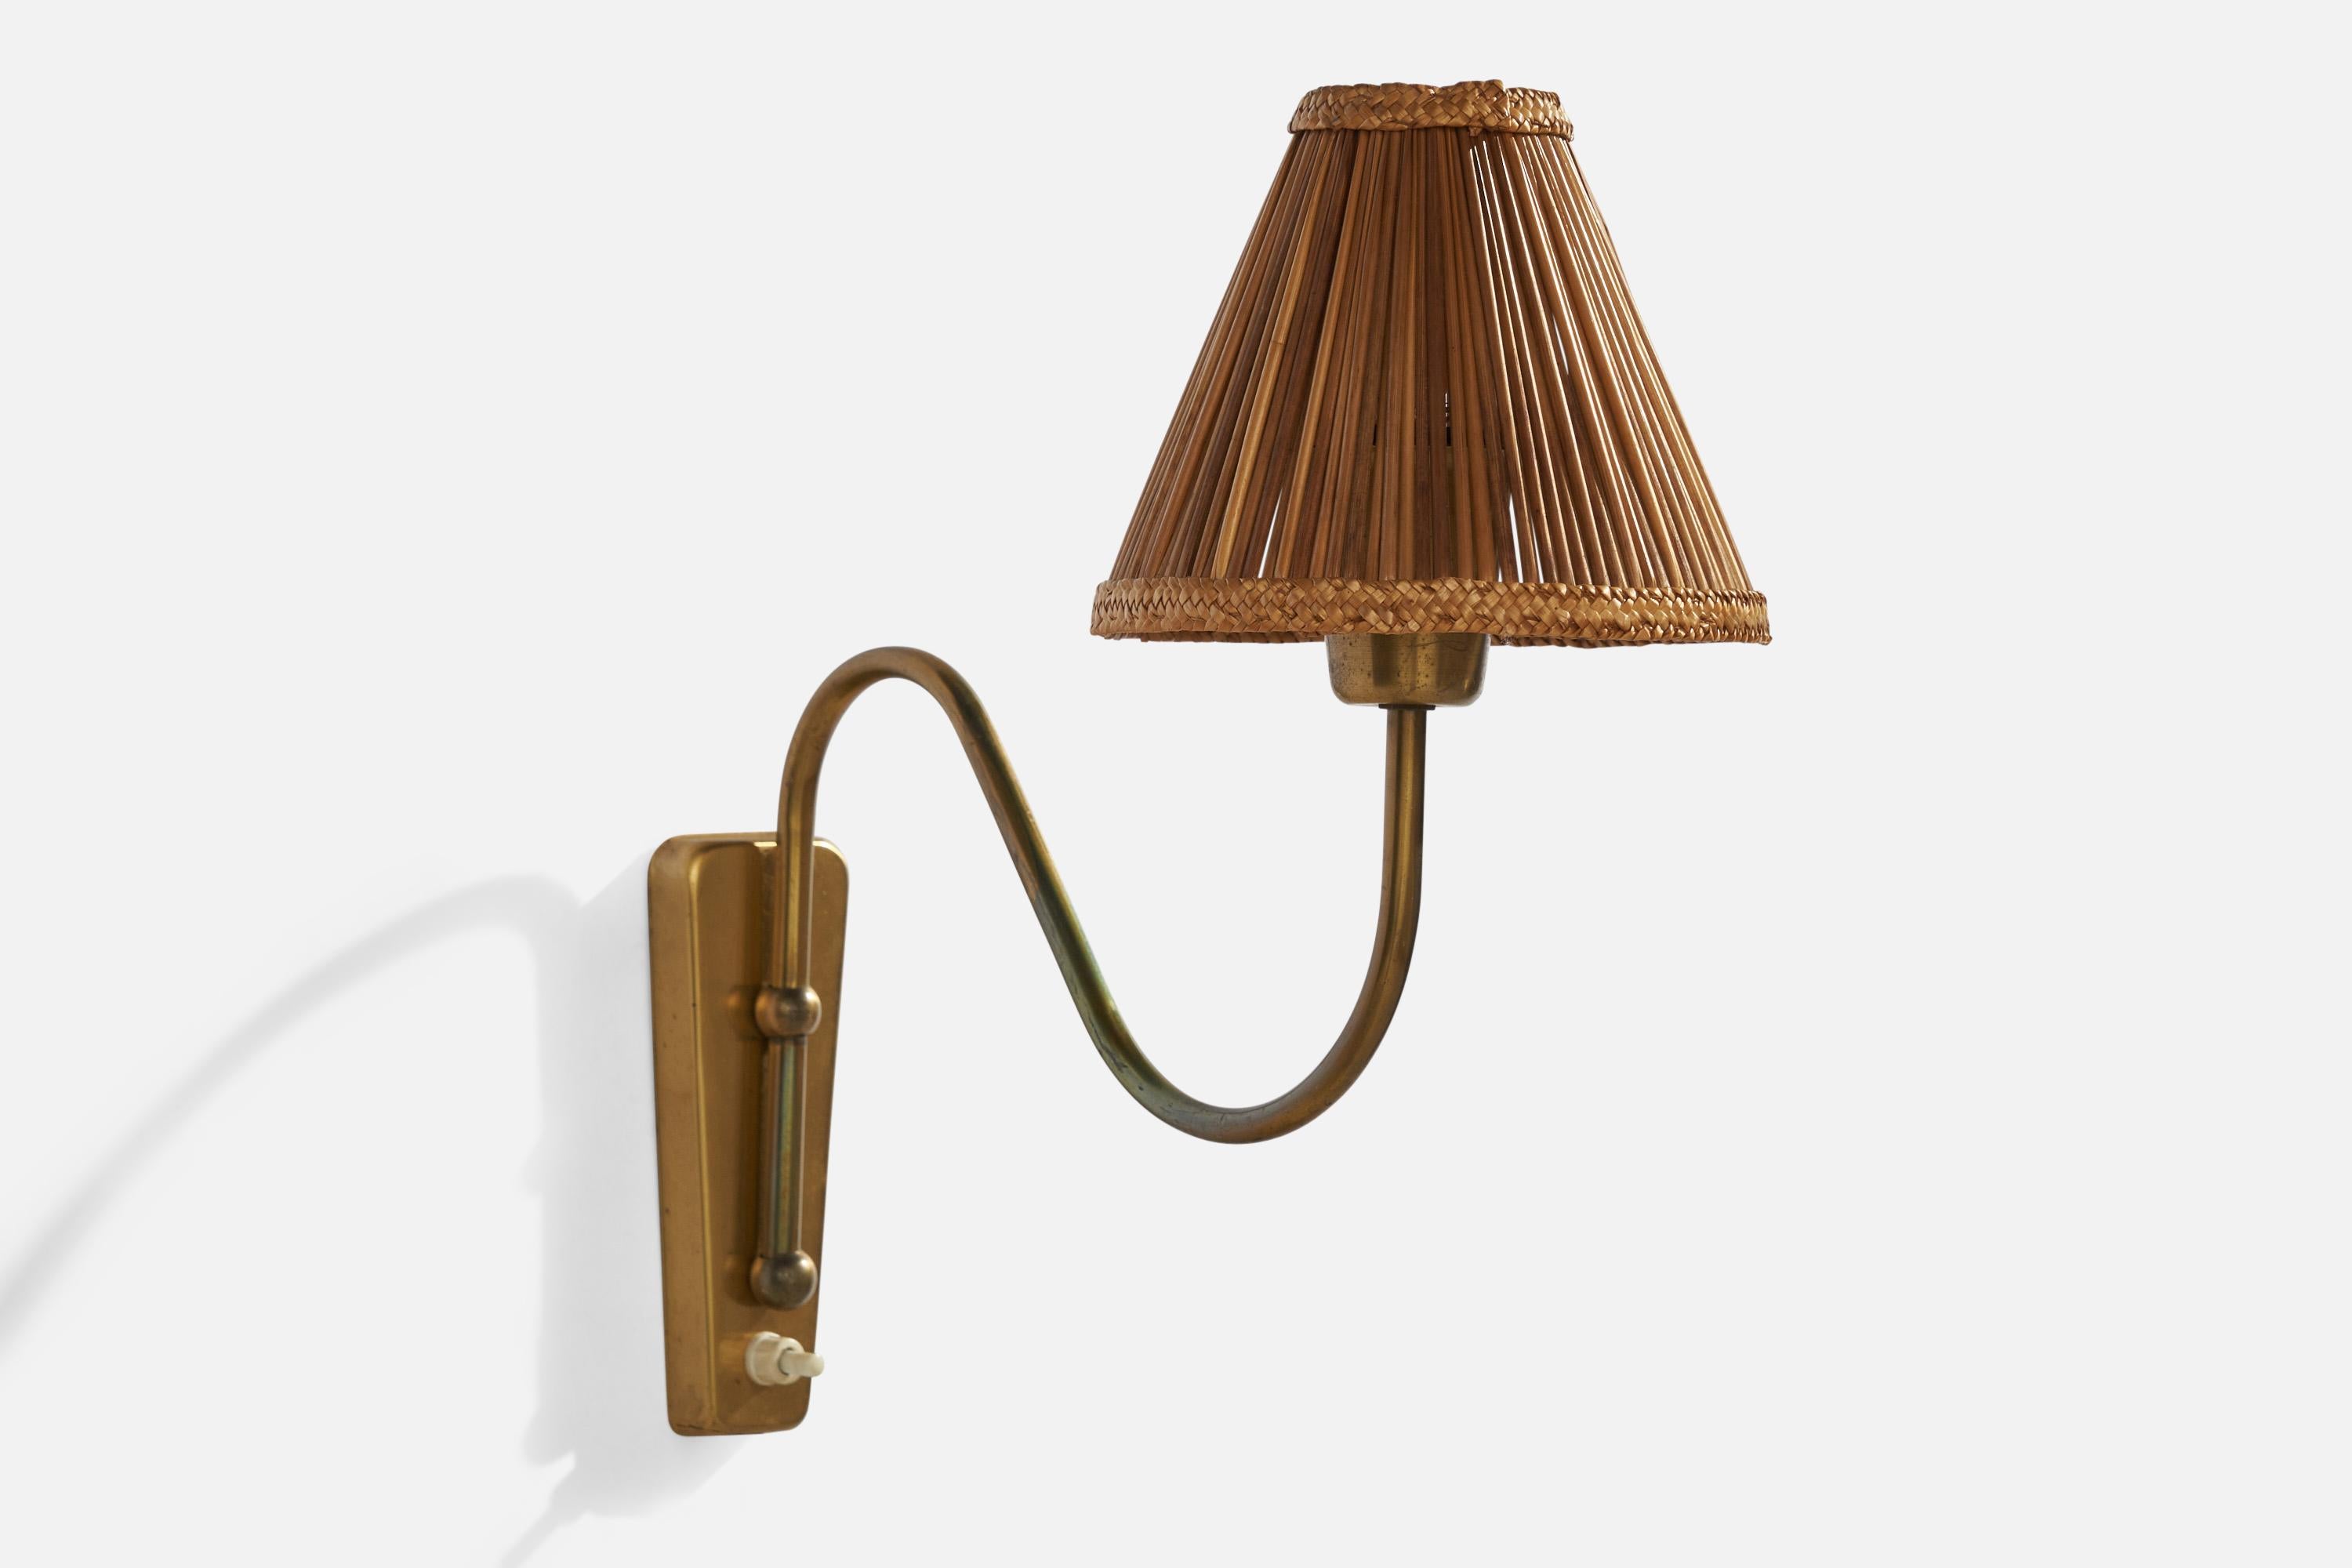 A brass and woven reed wall light designed and produced in Denmark, 1940s.

Overall Dimensions (inches): 13.5” H x 6” W x 13” D
Back Plate Dimensions (inches): 5.25 H x 2” W x .75” D
Bulb Specifications: E-26 Bulb
Number of Sockets: 1
All lighting